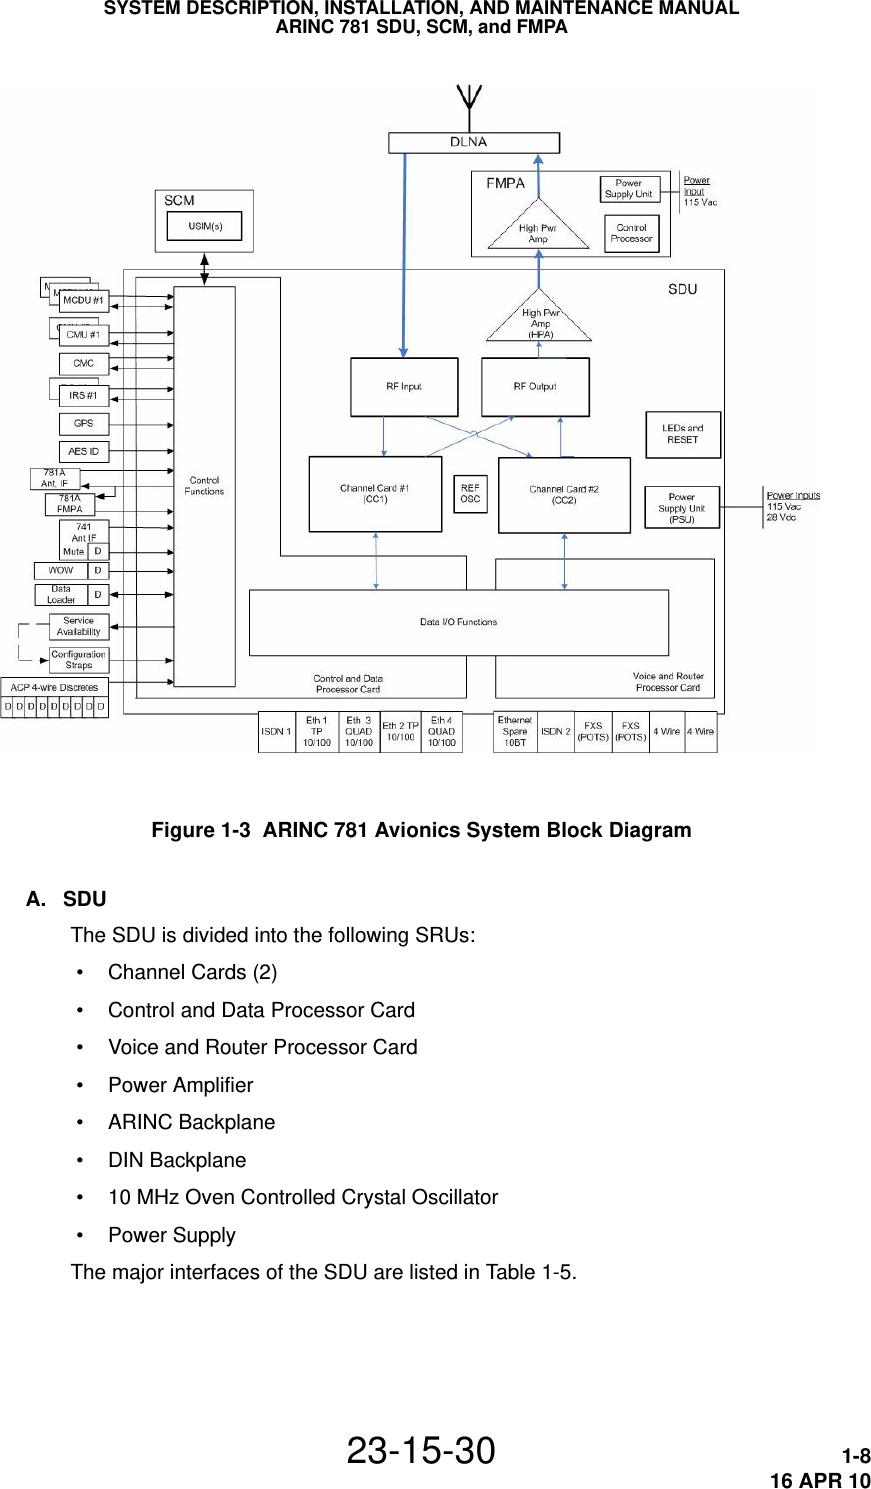 SYSTEM DESCRIPTION, INSTALLATION, AND MAINTENANCE MANUALARINC 781 SDU, SCM, and FMPA23-15-30 1-816 APR 10Figure 1-3  ARINC 781 Avionics System Block DiagramA. SDUThe SDU is divided into the following SRUs: • Channel Cards (2) • Control and Data Processor Card • Voice and Router Processor Card • Power Amplifier • ARINC Backplane • DIN Backplane • 10 MHz Oven Controlled Crystal Oscillator • Power SupplyThe major interfaces of the SDU are listed in Tab l e 1-5.